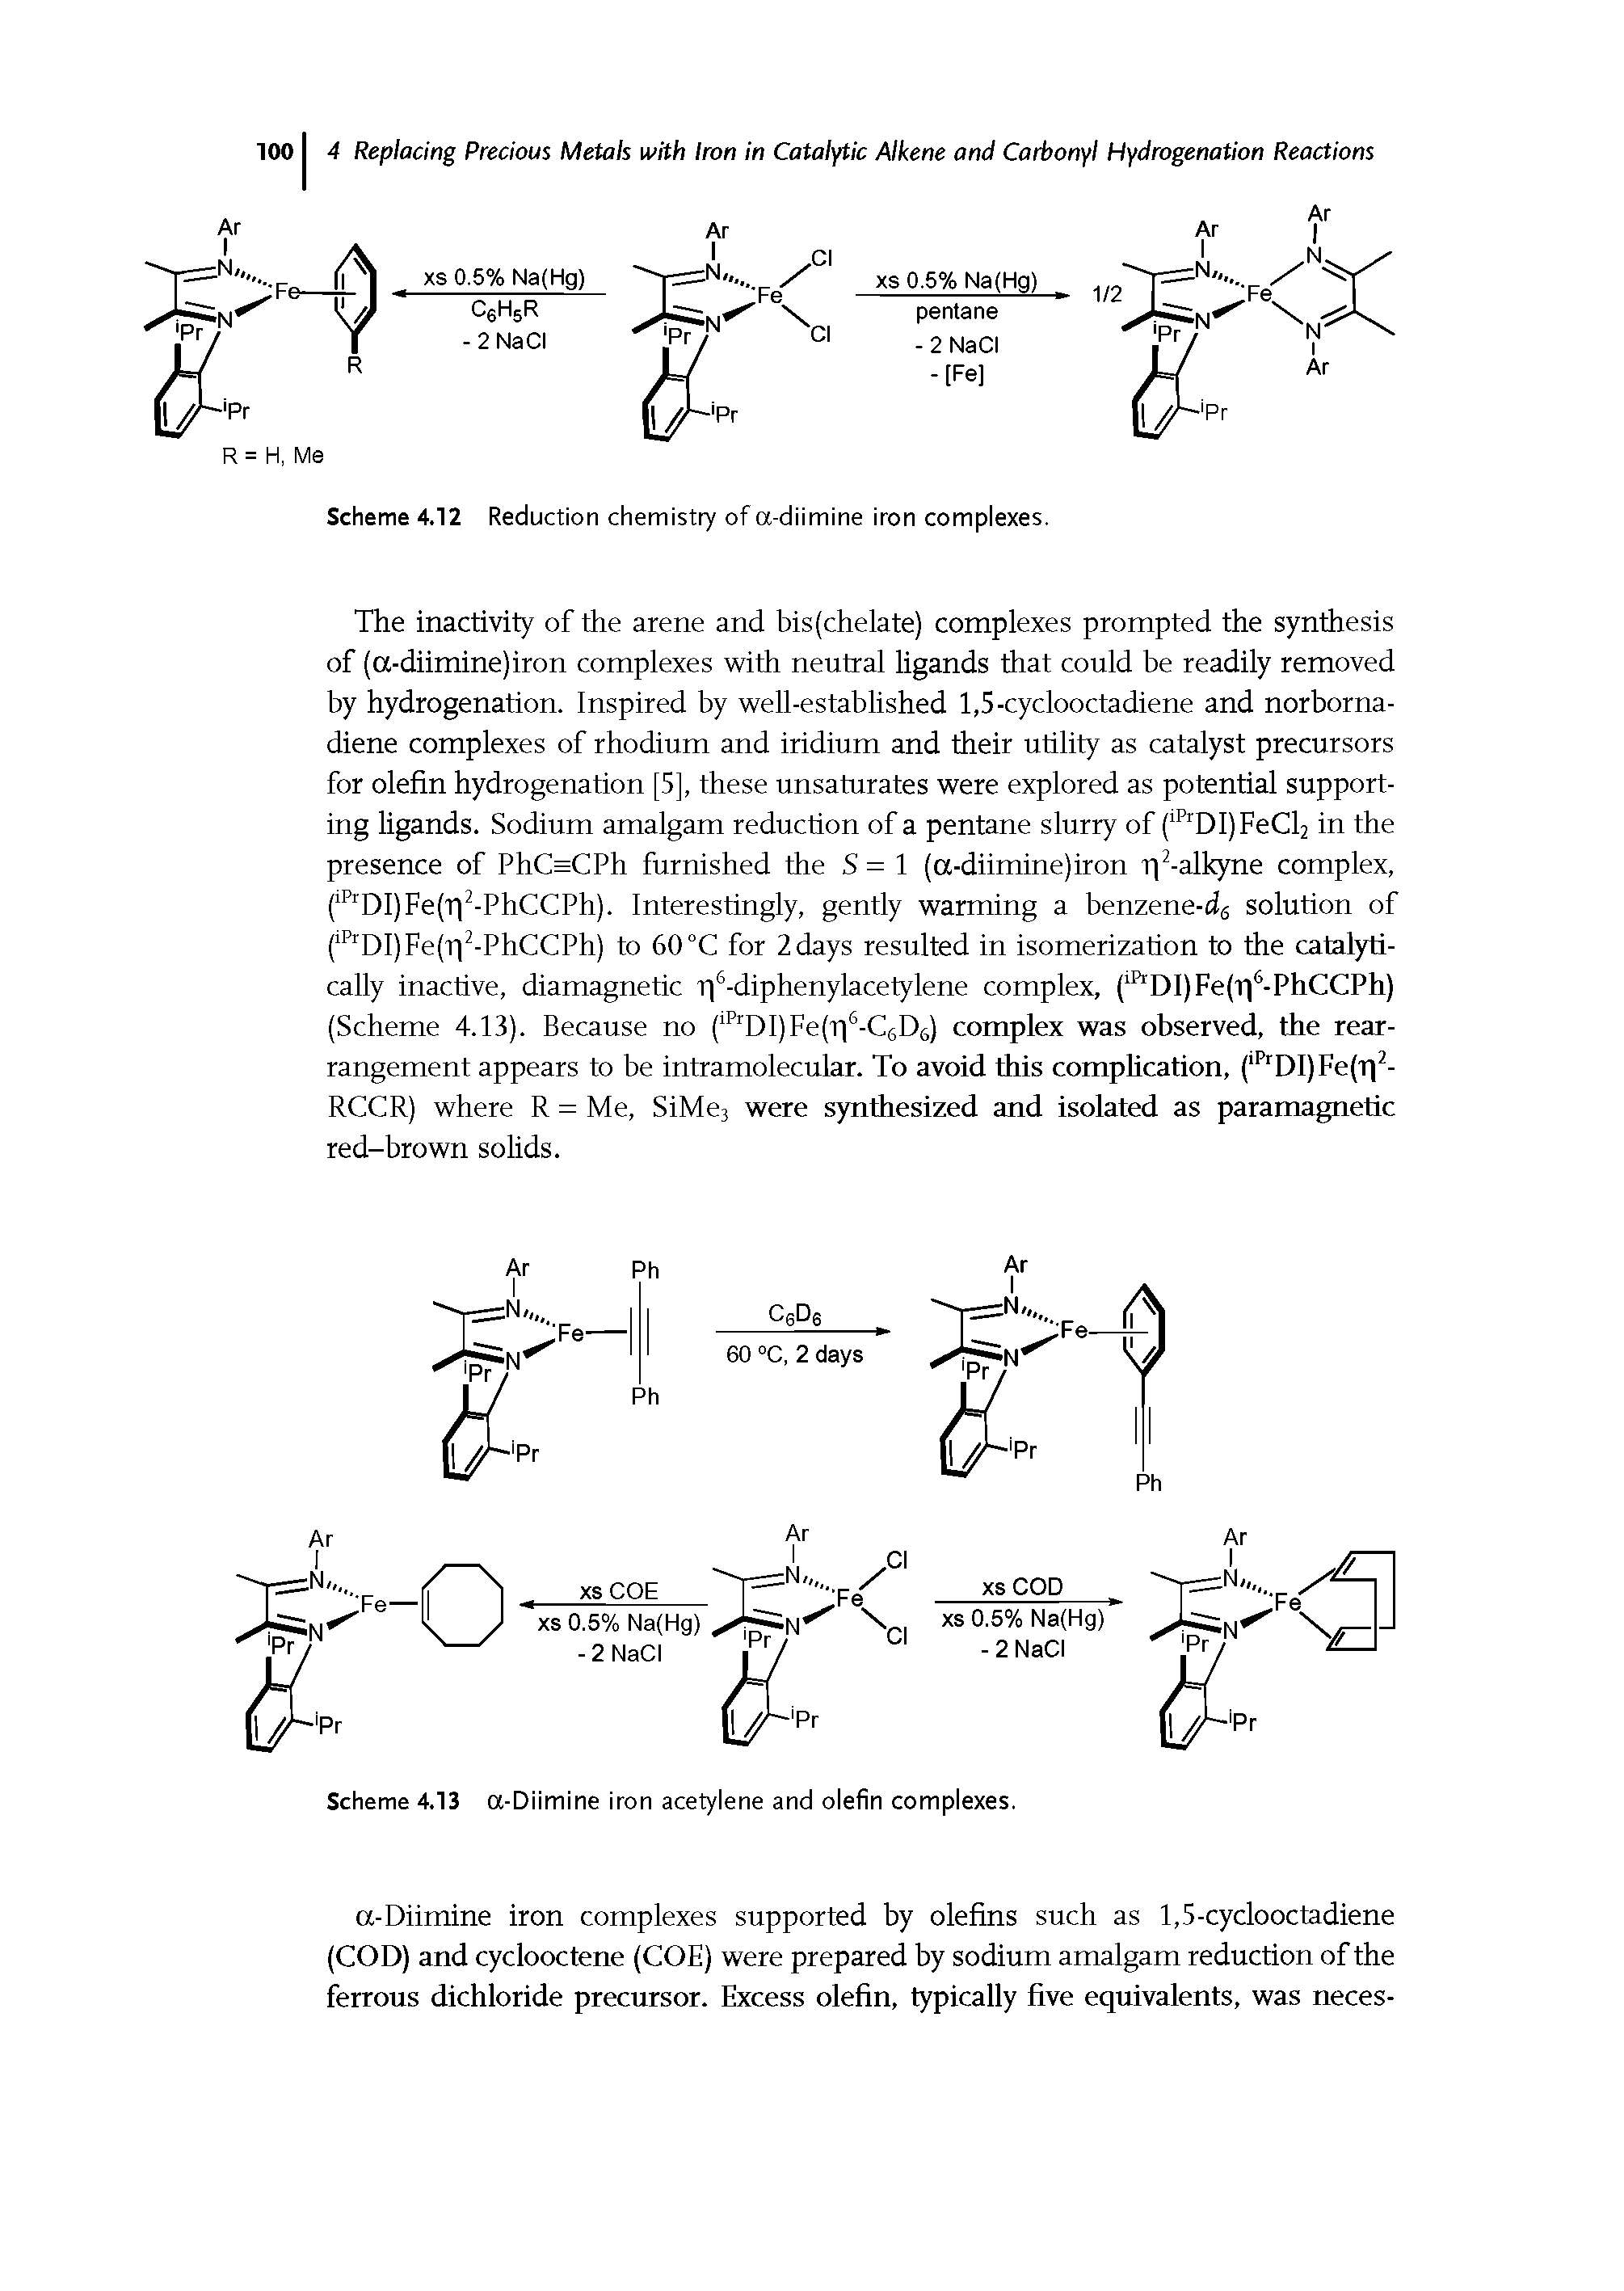 Scheme 4.12 Reduction chemistry of a-diimine iron complexes.